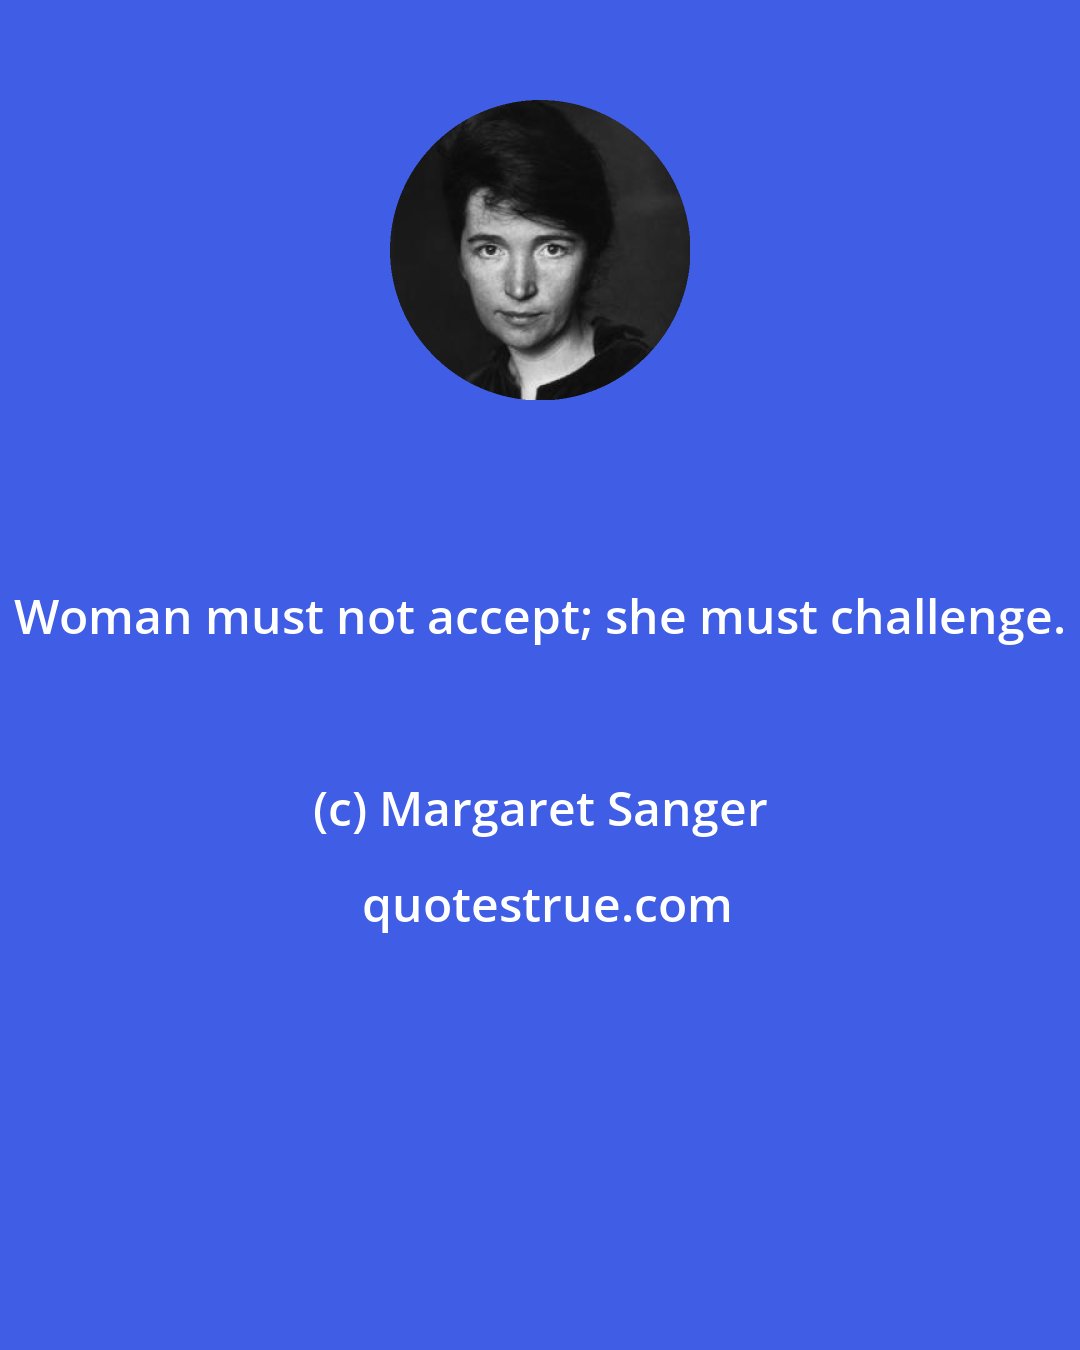 Margaret Sanger: Woman must not accept; she must challenge.